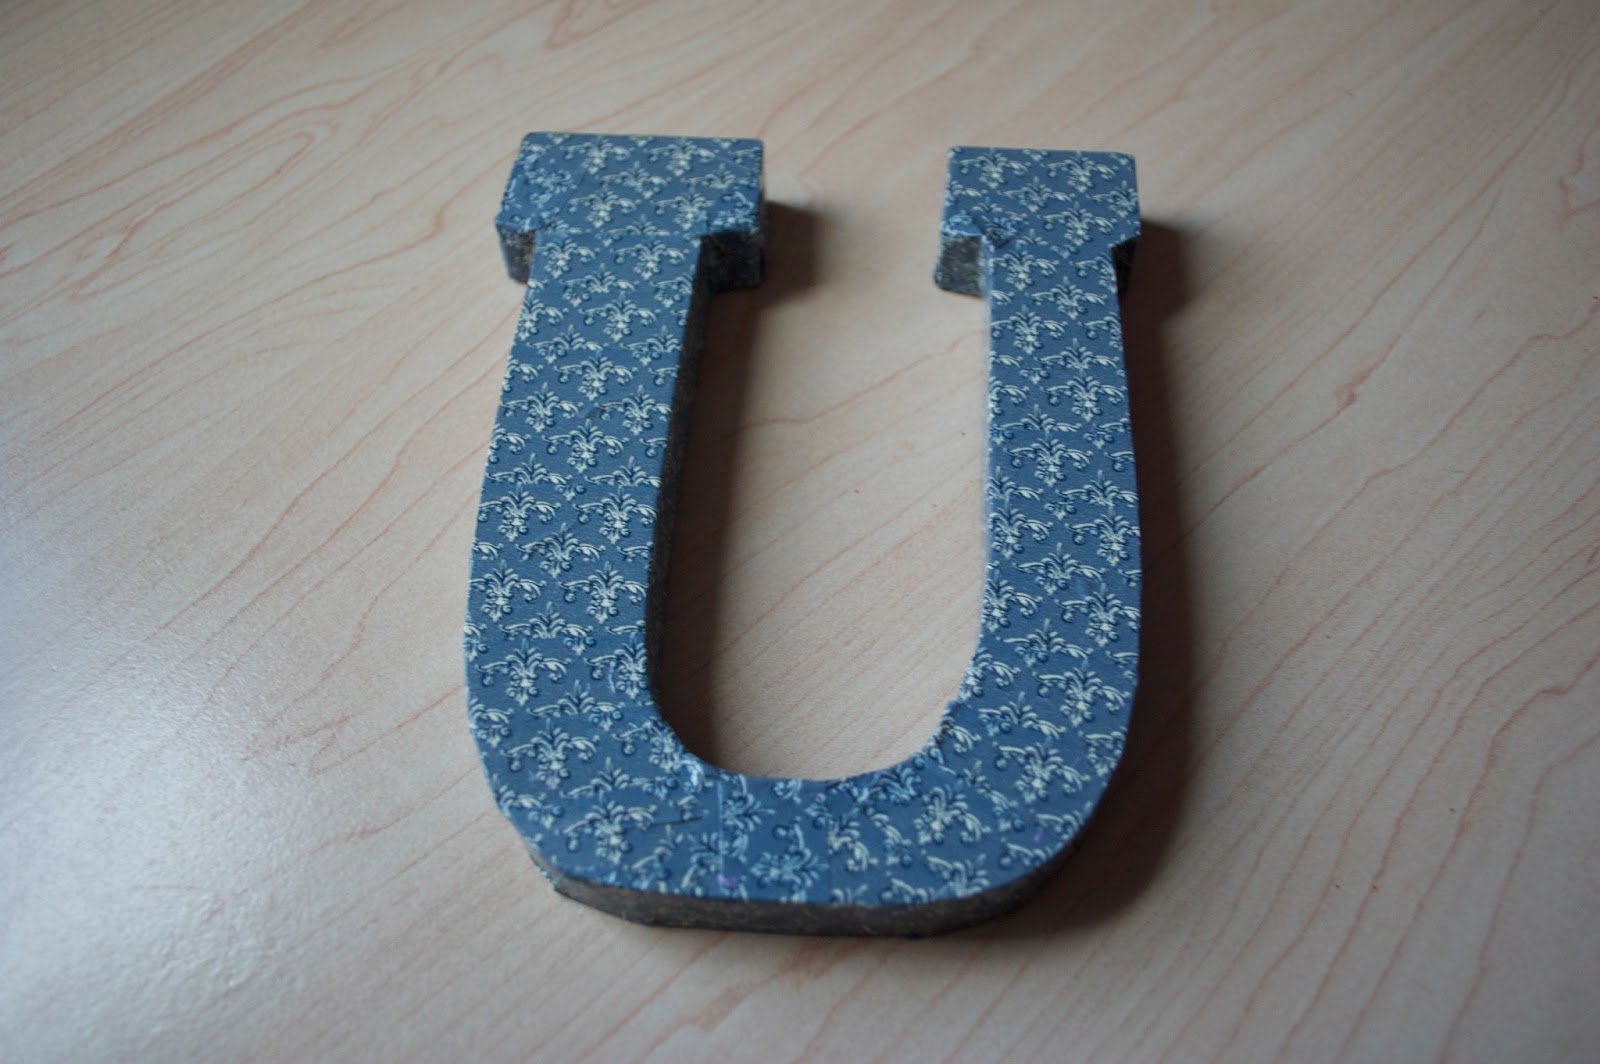 Use Washi Tape to Decorate Wooden Letters - My Girlish Whims